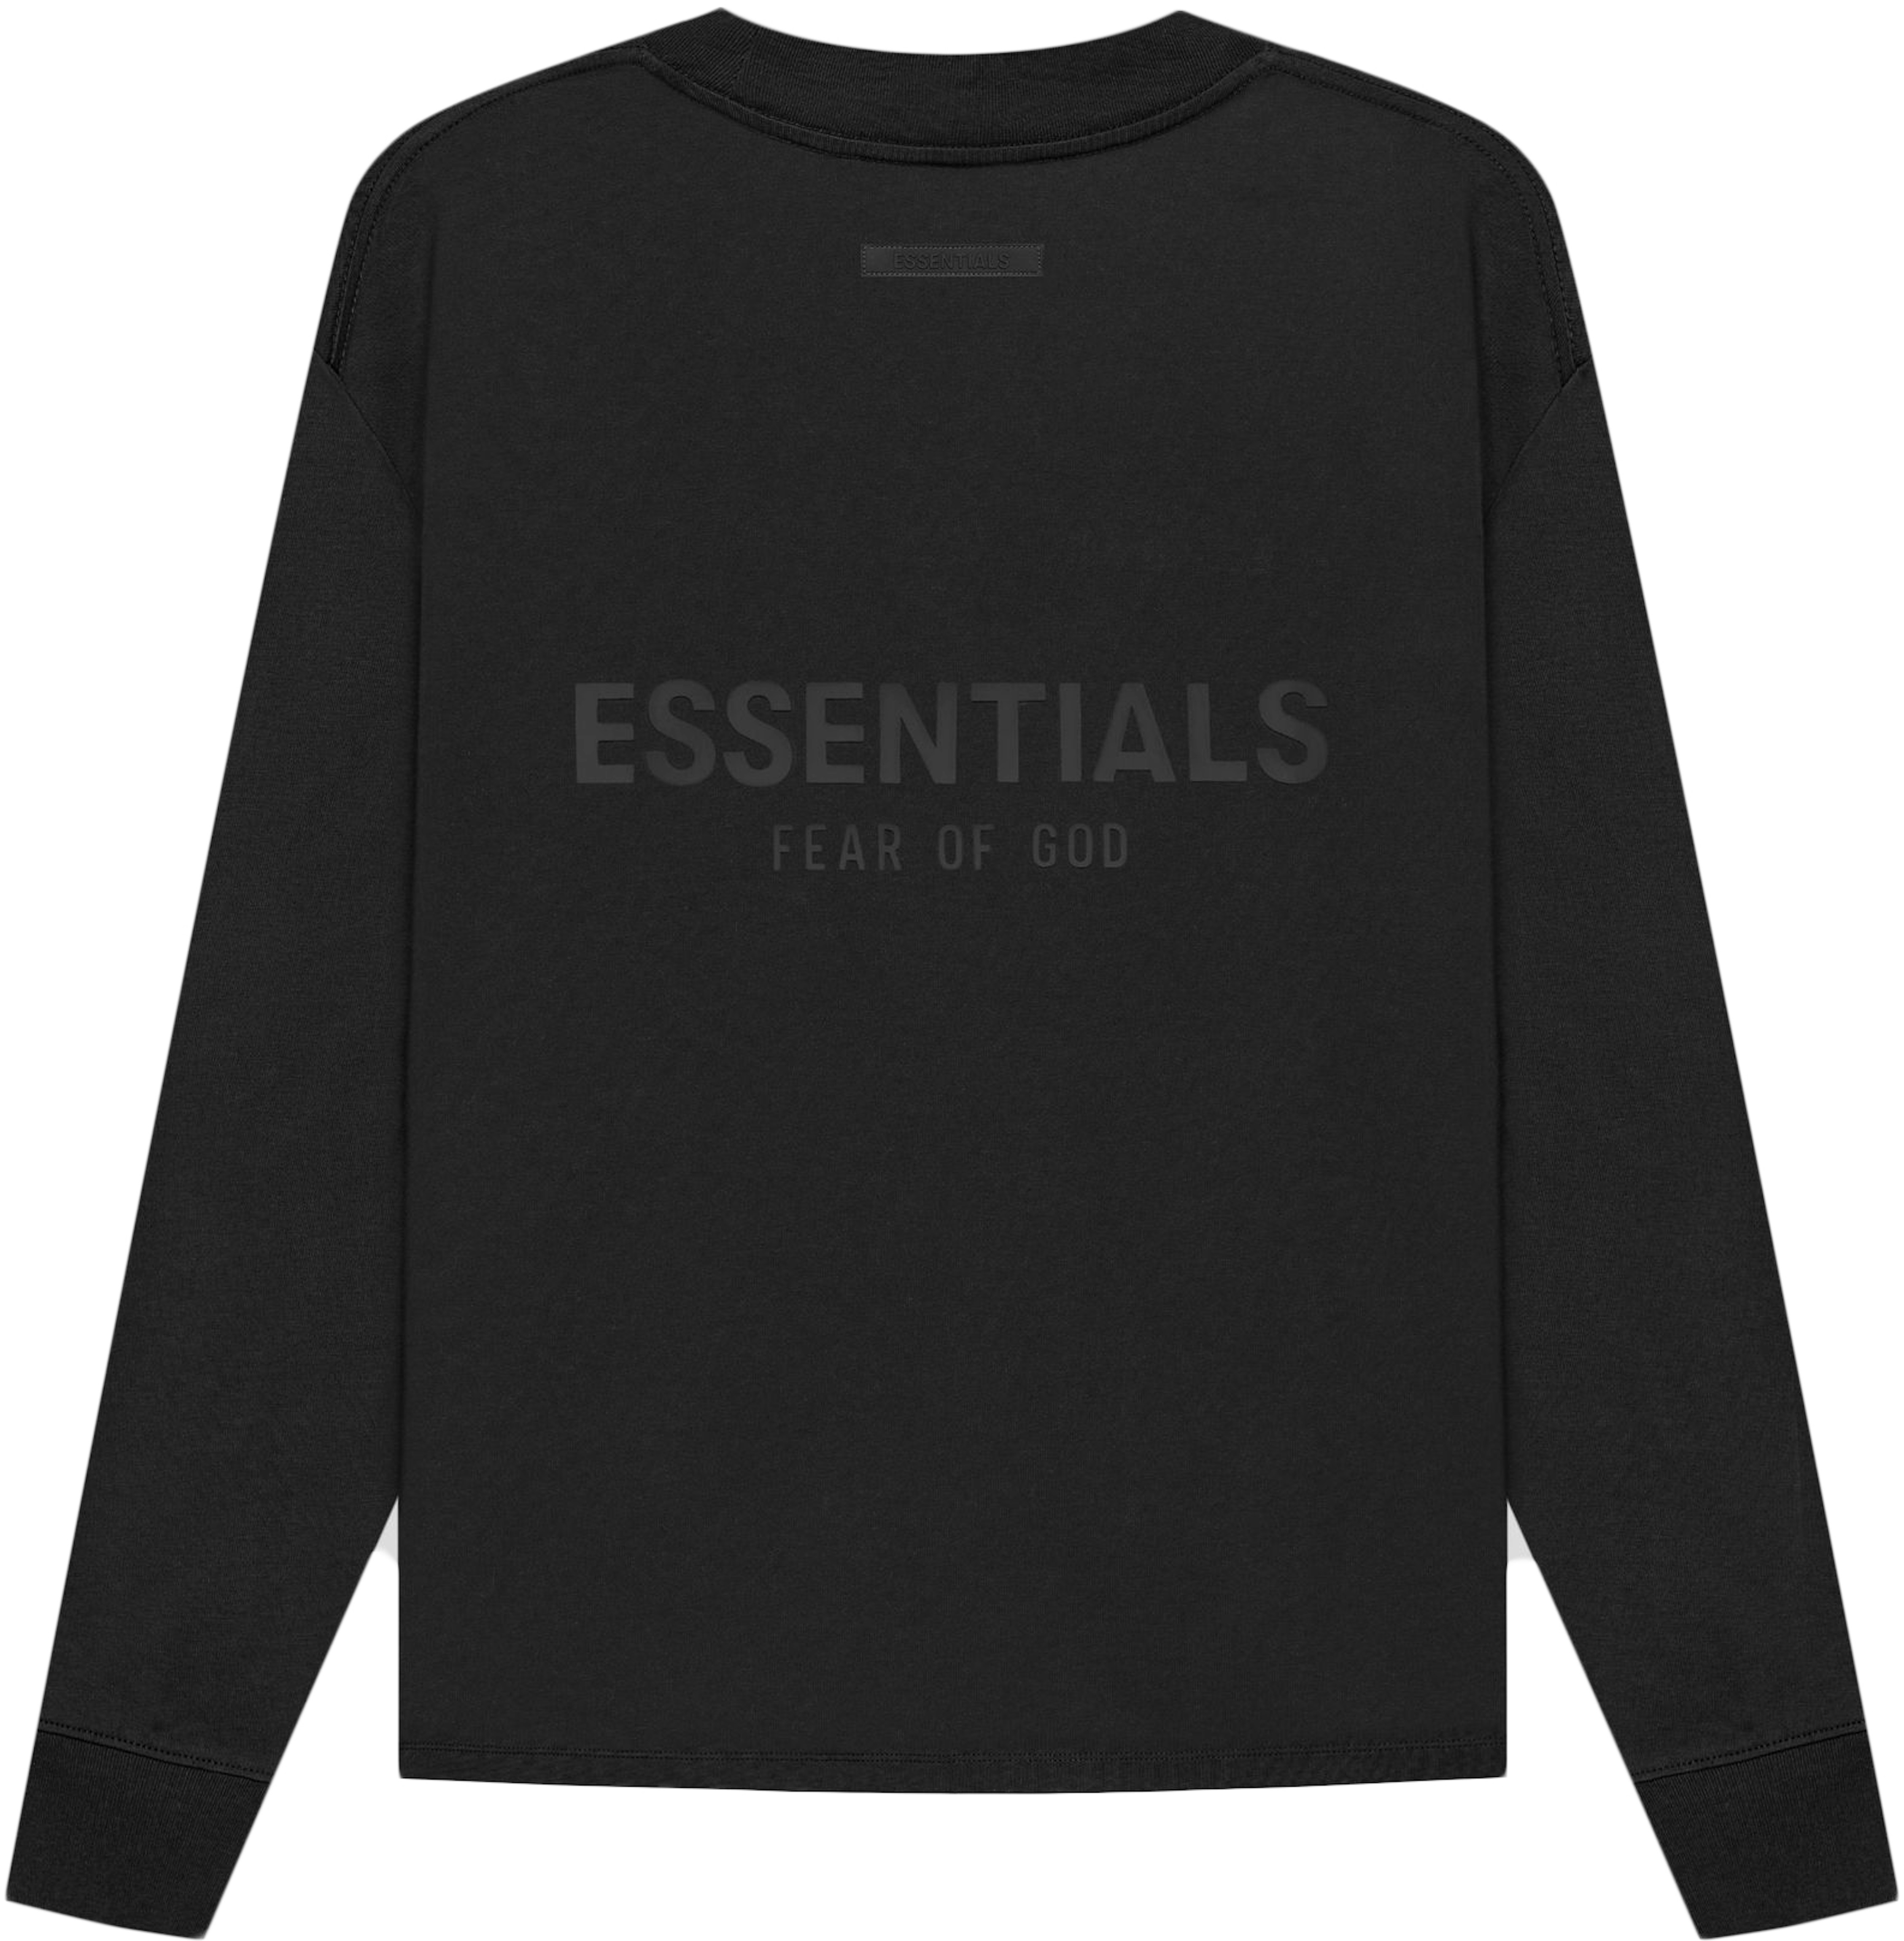 FEAR OF GOD ESSENTIALS Long Sleeve T-shirt Black/Stretch Limo - SS21